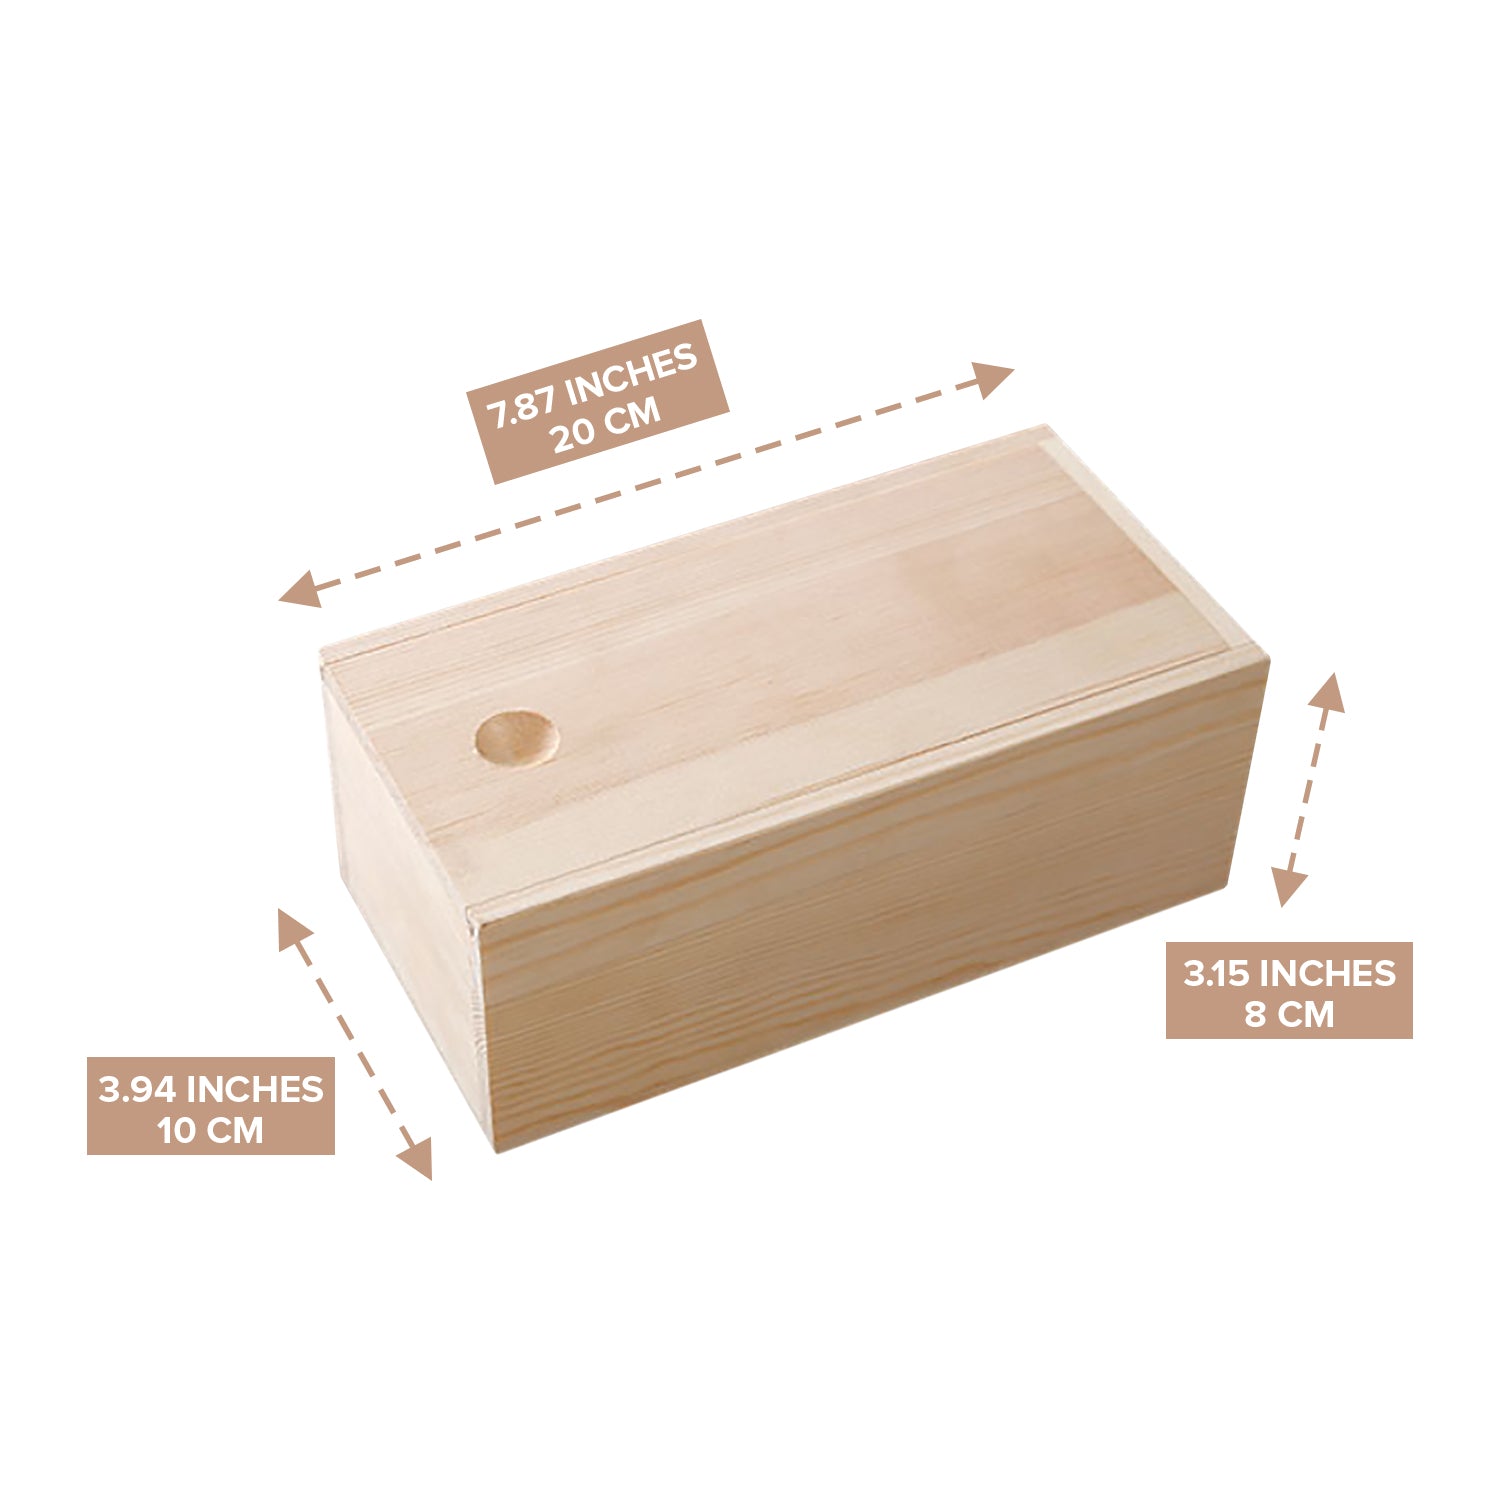 Load image into Gallery viewer, Natural Pine Wooden Box | Wood Storage Container with Sliding Lid